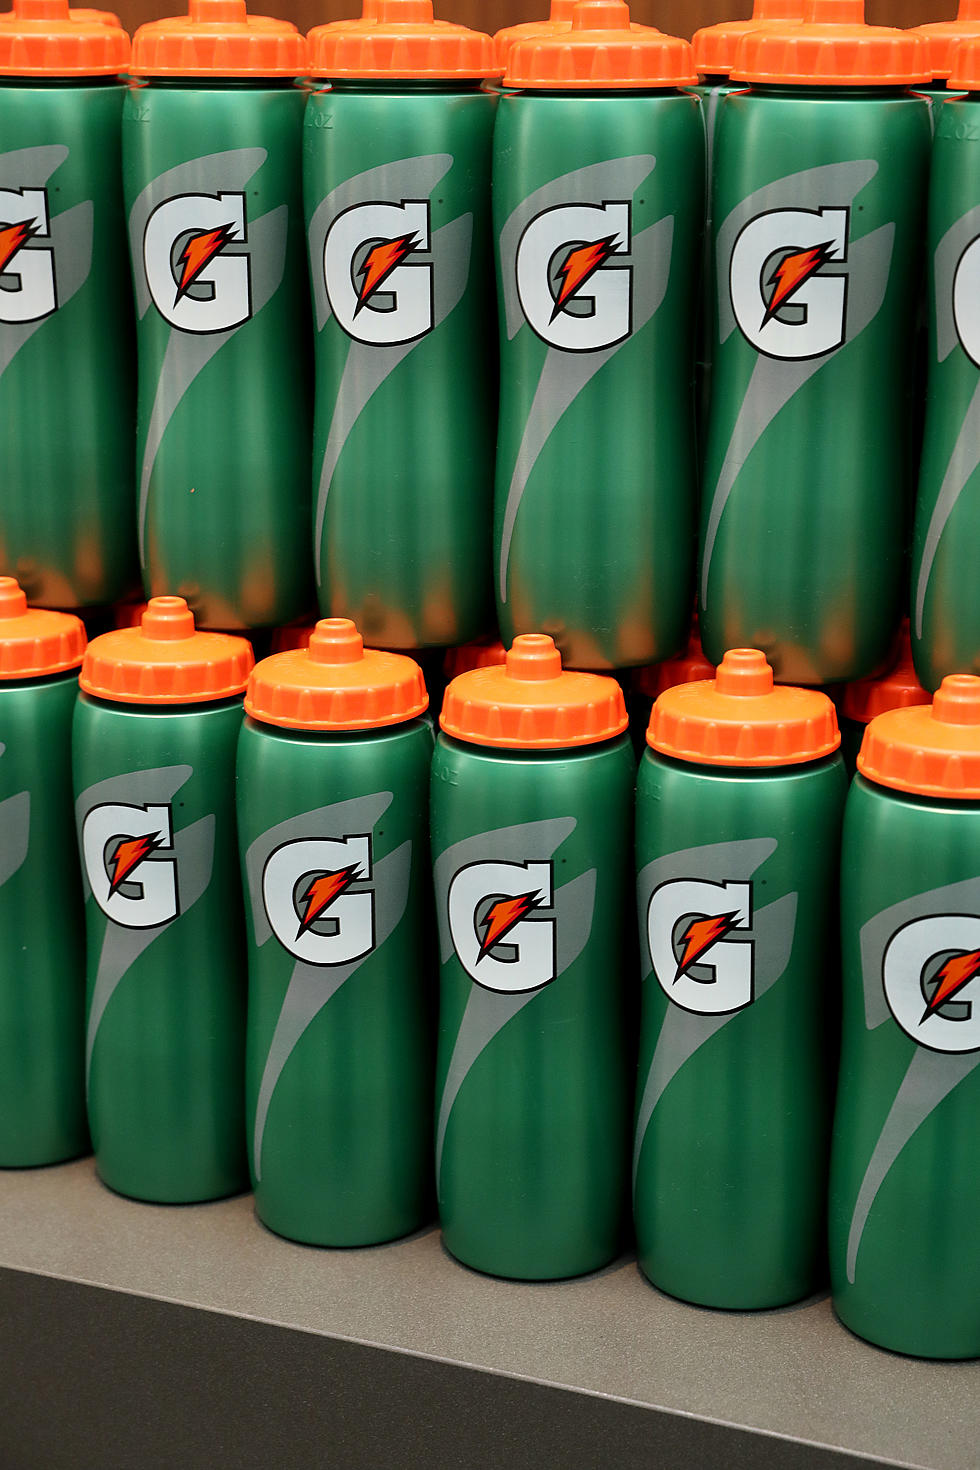 Why is there a Massive Gatorade Shortage in New Jersey?